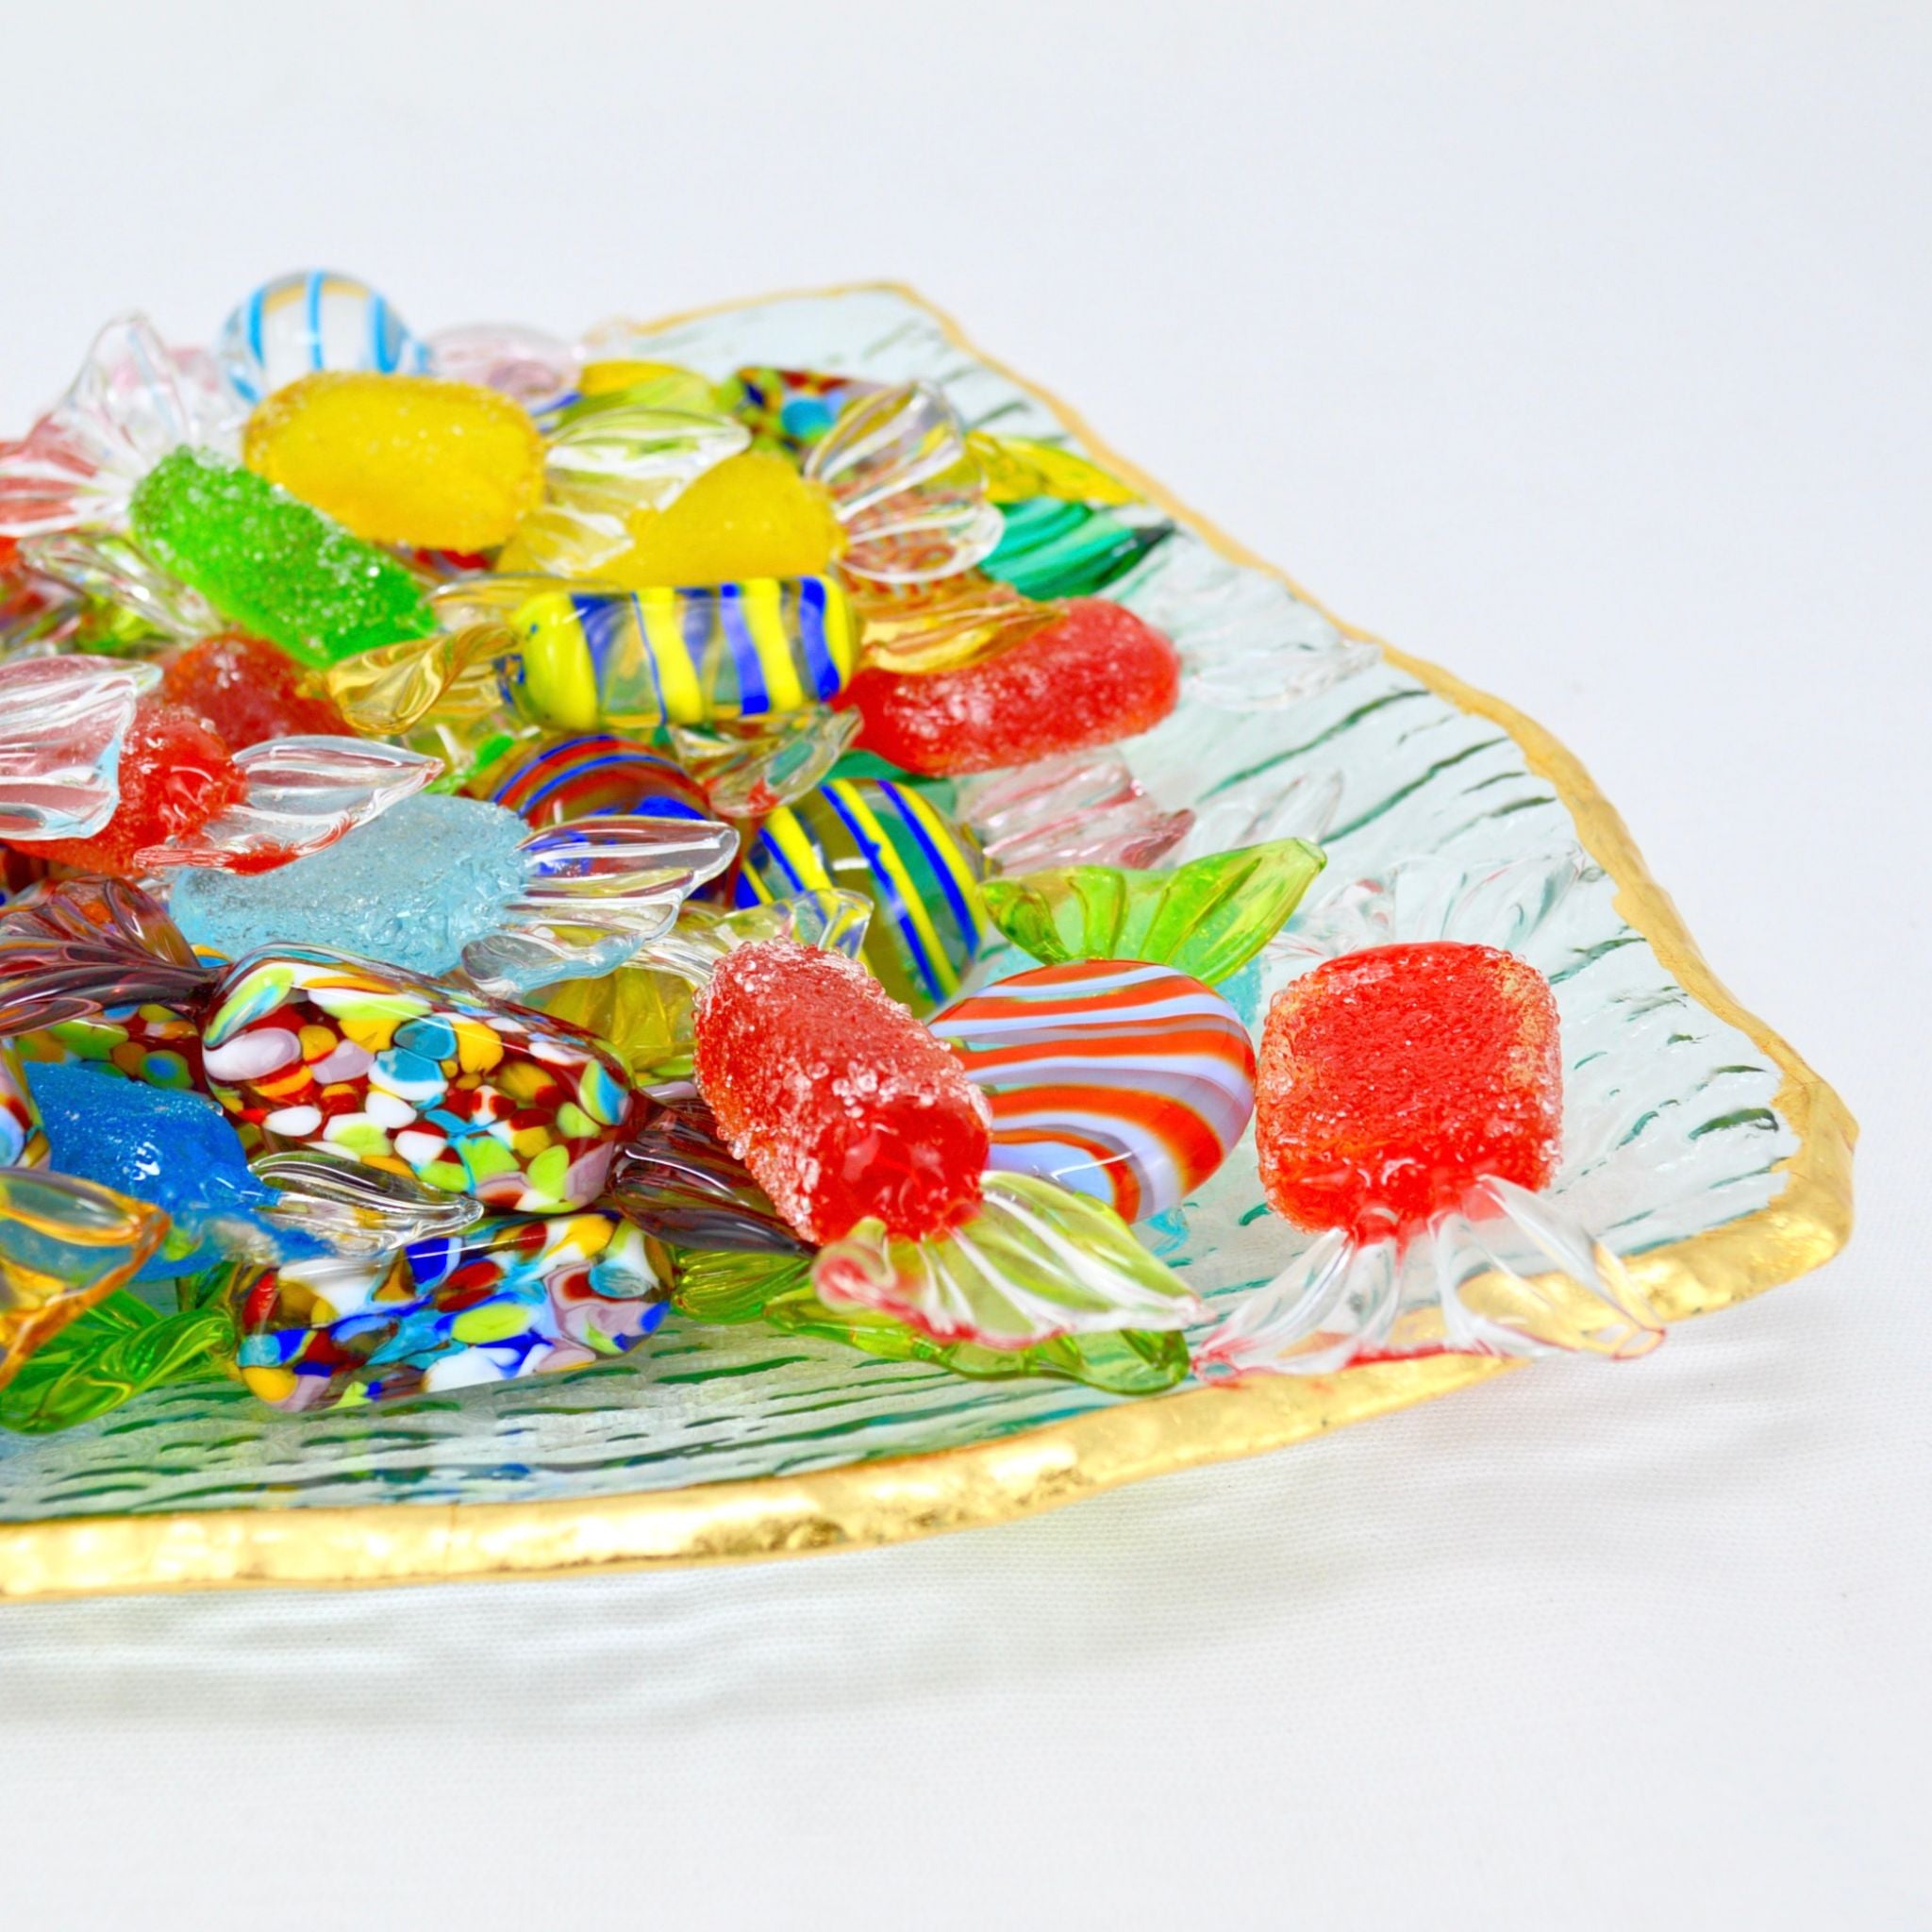 Murano Glass Candy, Classic, Set of 3, 5, or 10 Candies